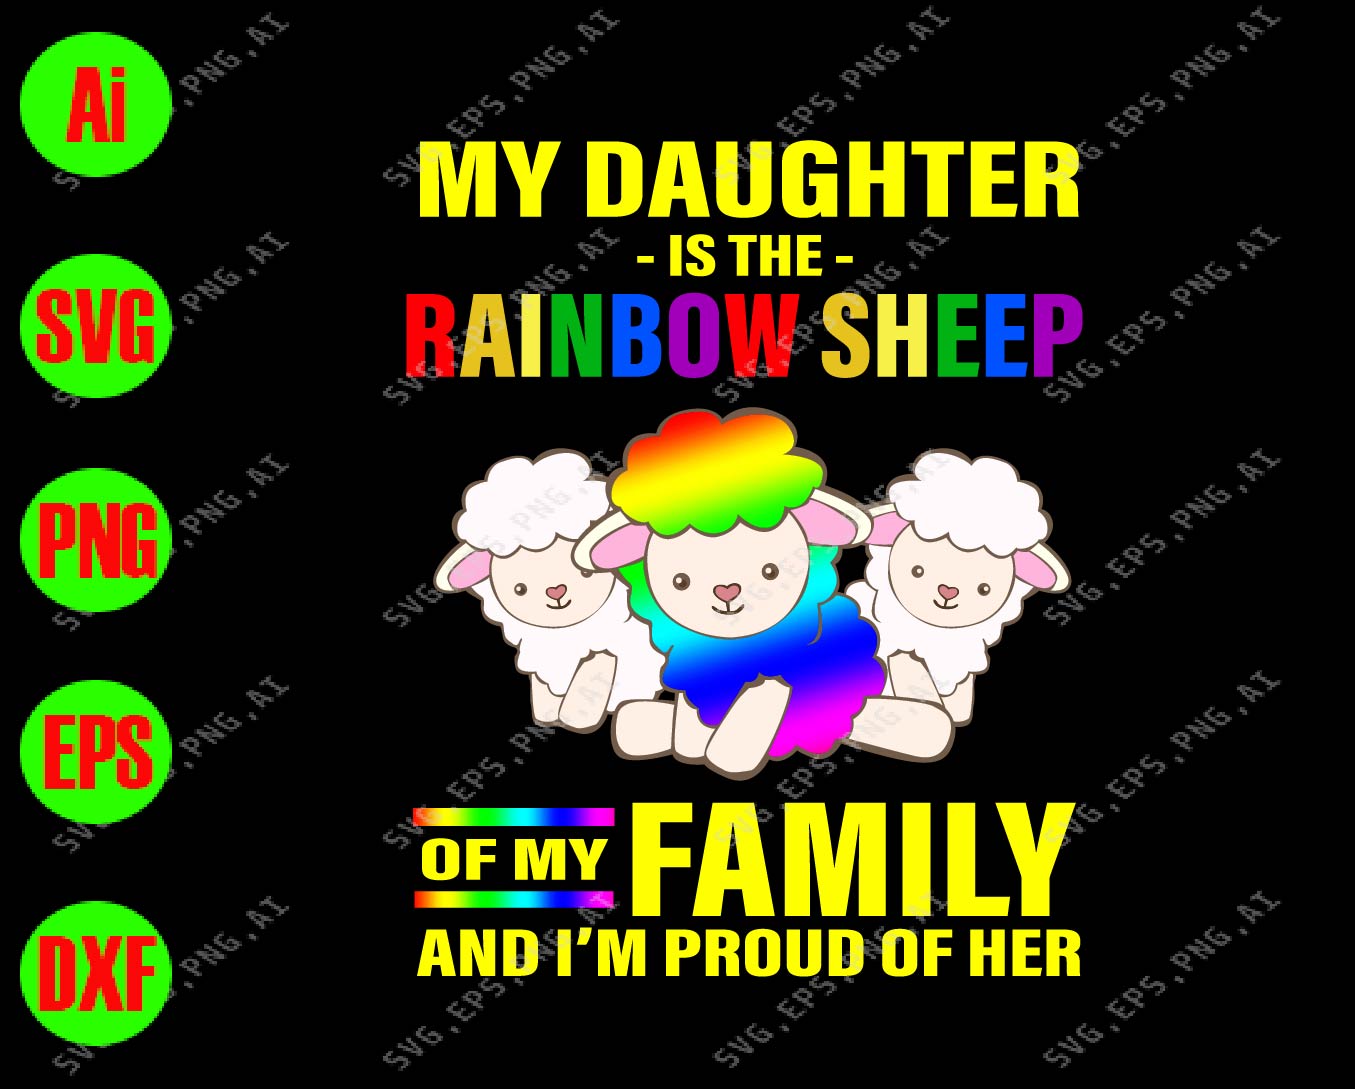 Download My Daughter Is The Rainbow Sheep Of My Family And I M Proud Of Her Svg Dxf Eps Png Digital Download Designbtf Com